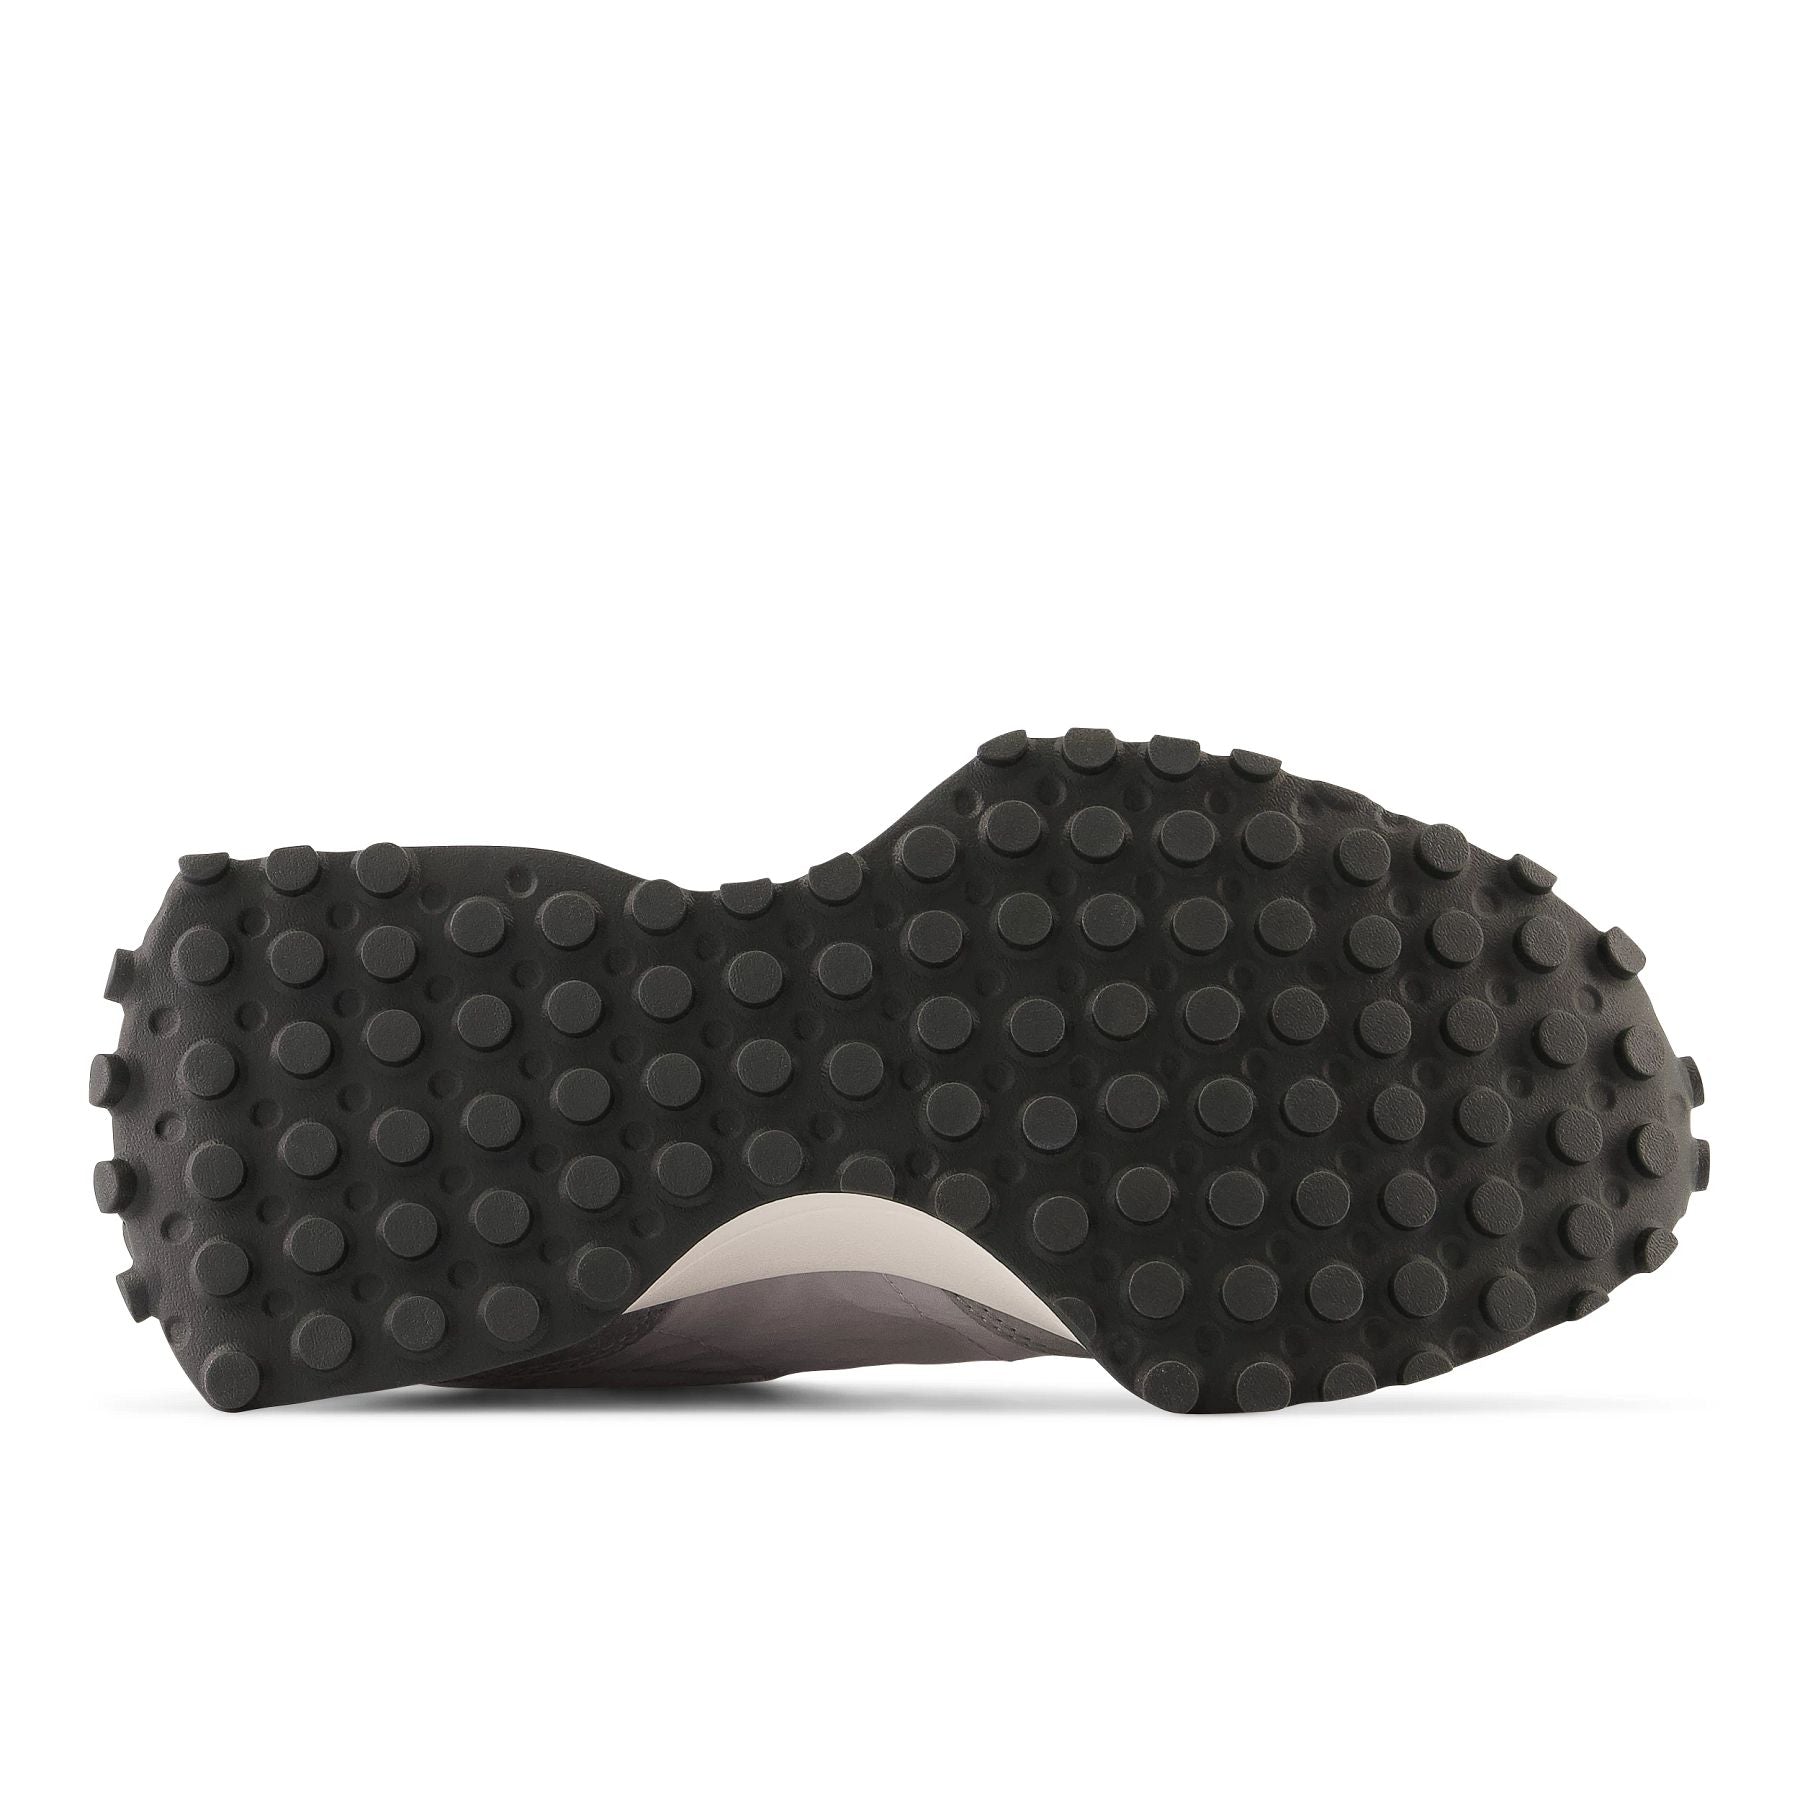 Bottom (outer sole) view of the Women's 327 in Grey/Rain